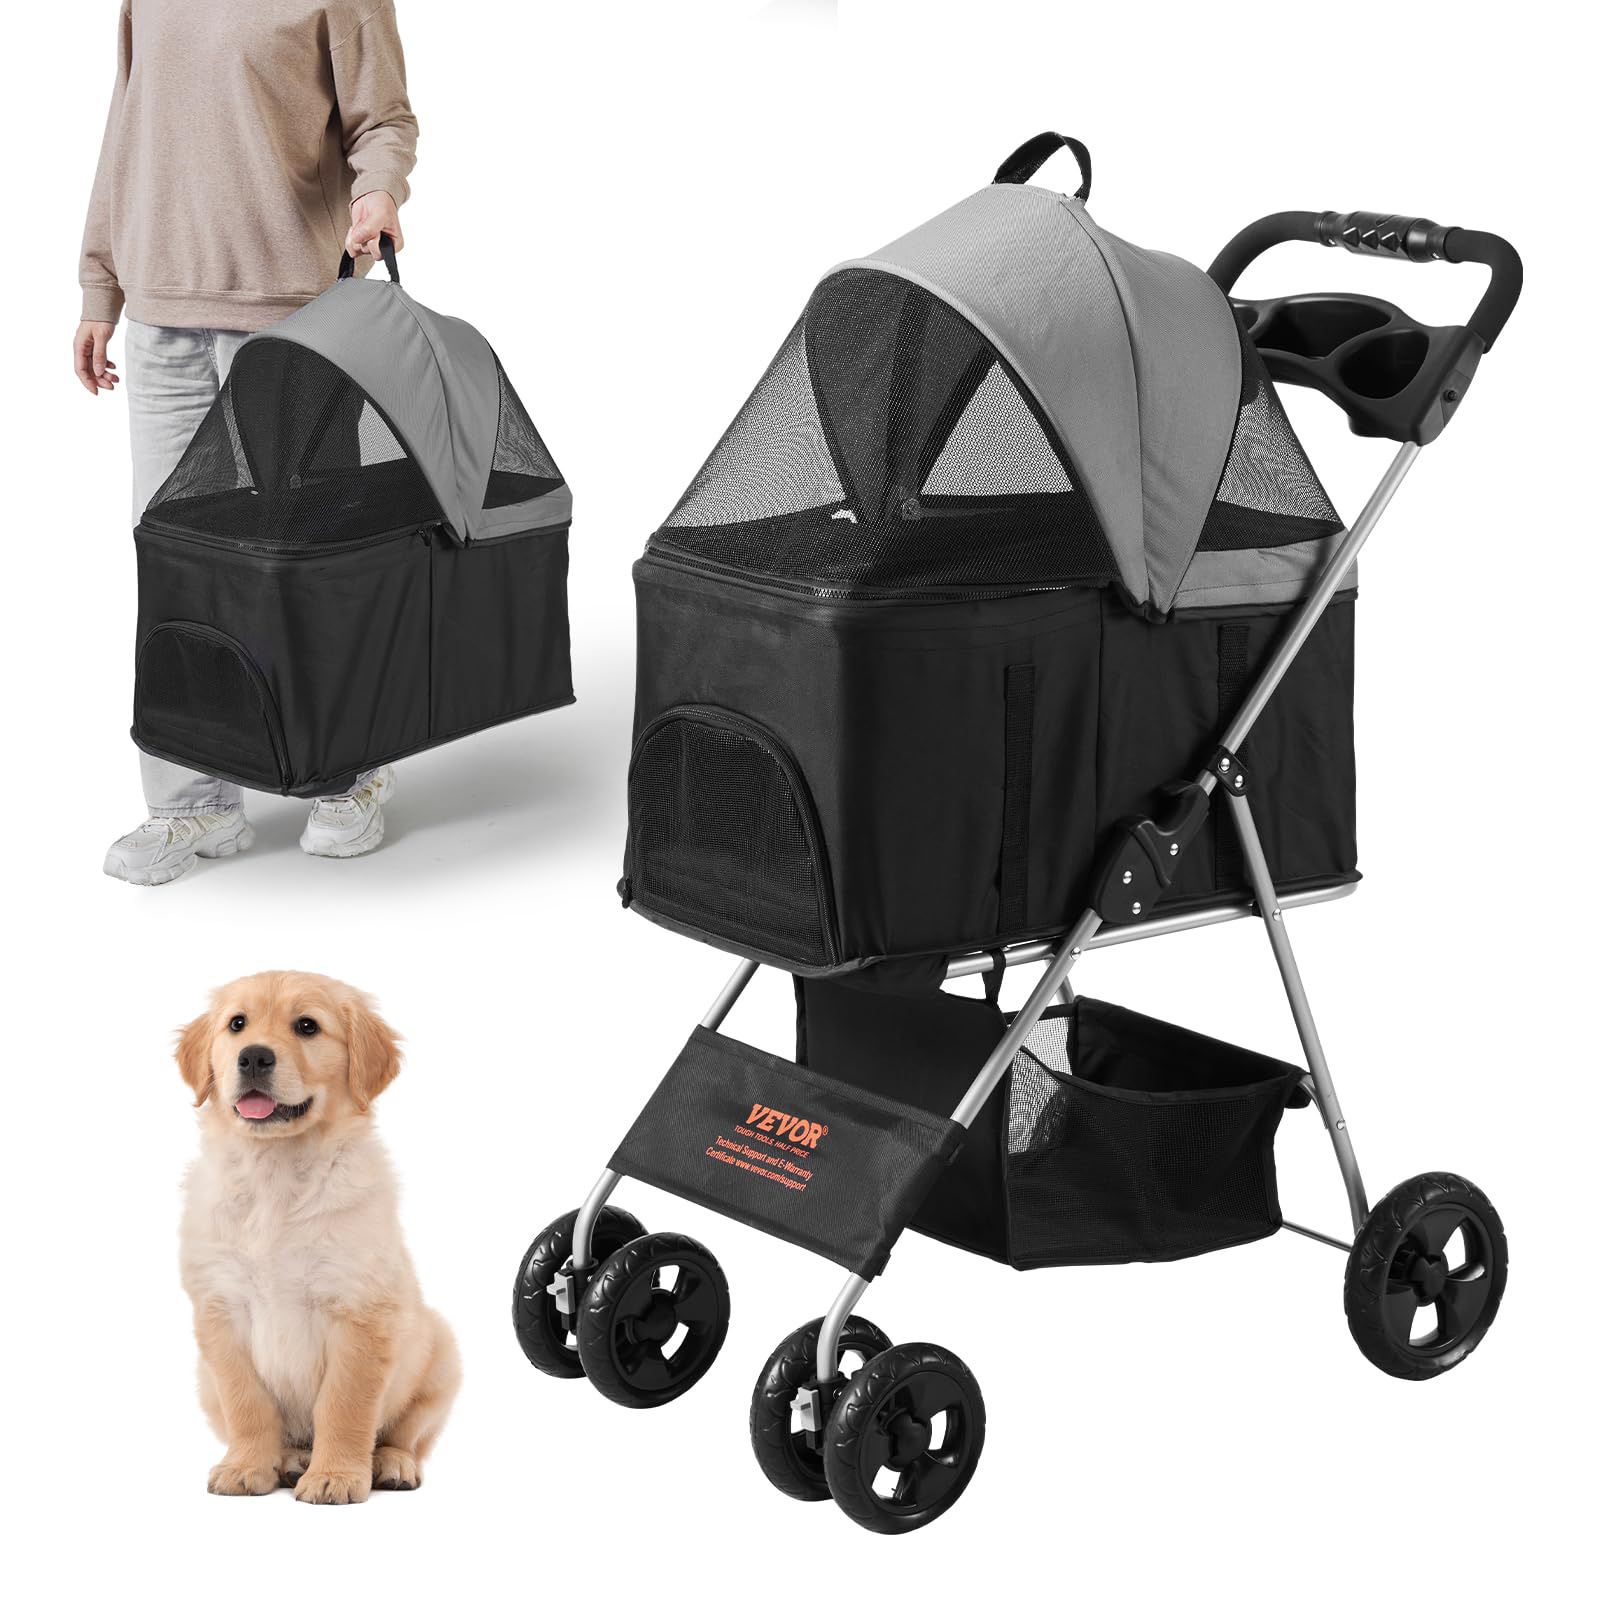 VEVOR 3 In 1 Dog Stroller For Medium Small Dogs Up To 35lbs, 4 Wheels Folding Pet Stroller For Dogs Cats With Detachable Carrier, Portable Cat Puppy J